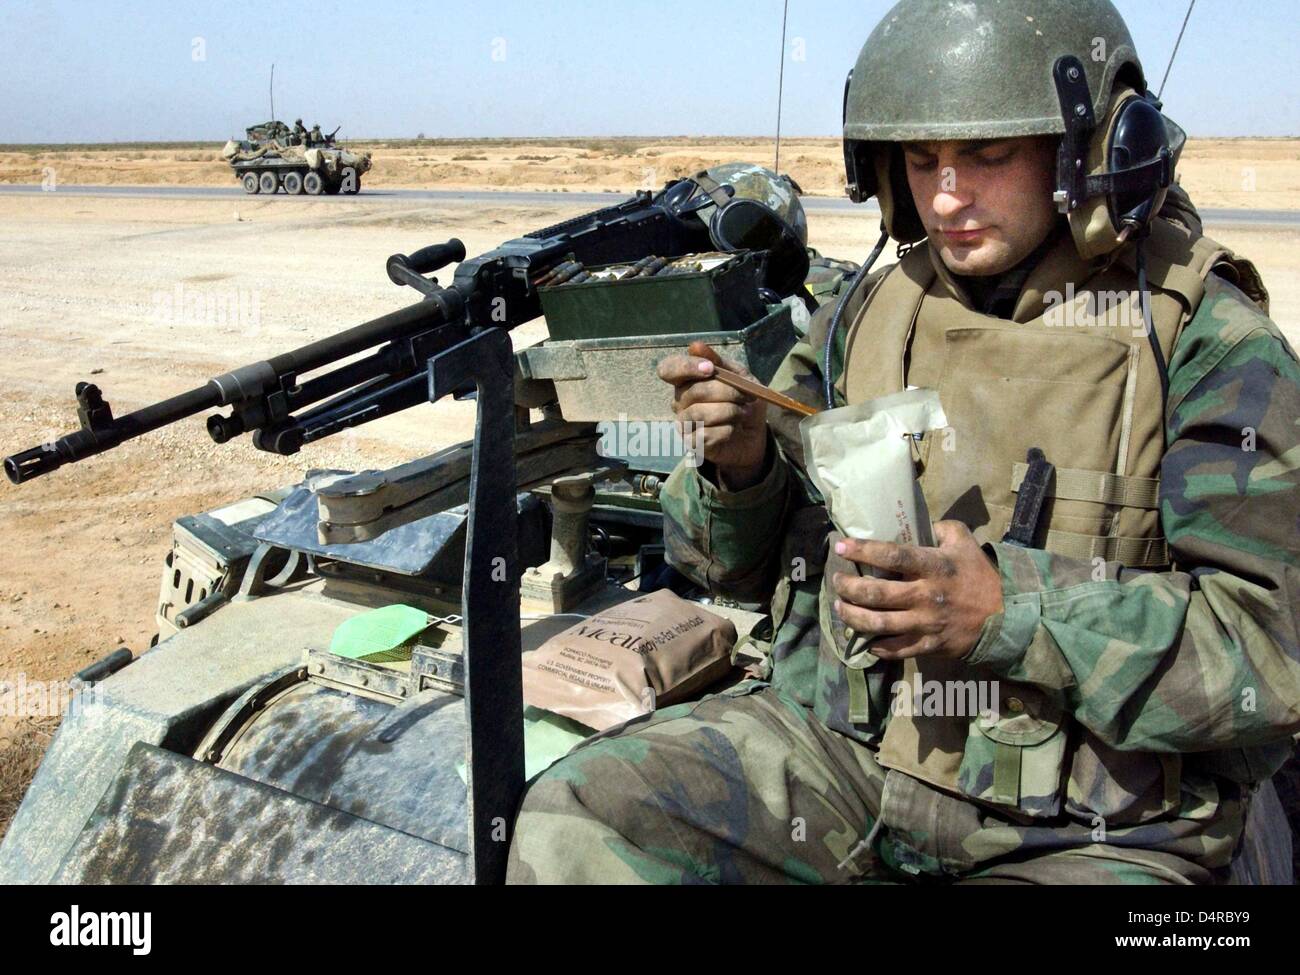 Sergeant John Stanley of the 3rd reconnaissance batallion of the US Marine infantry is eating the half of his daily ration, on 29 March 2003, near Ad Dianiyah in southern Iraq. Stock Photo